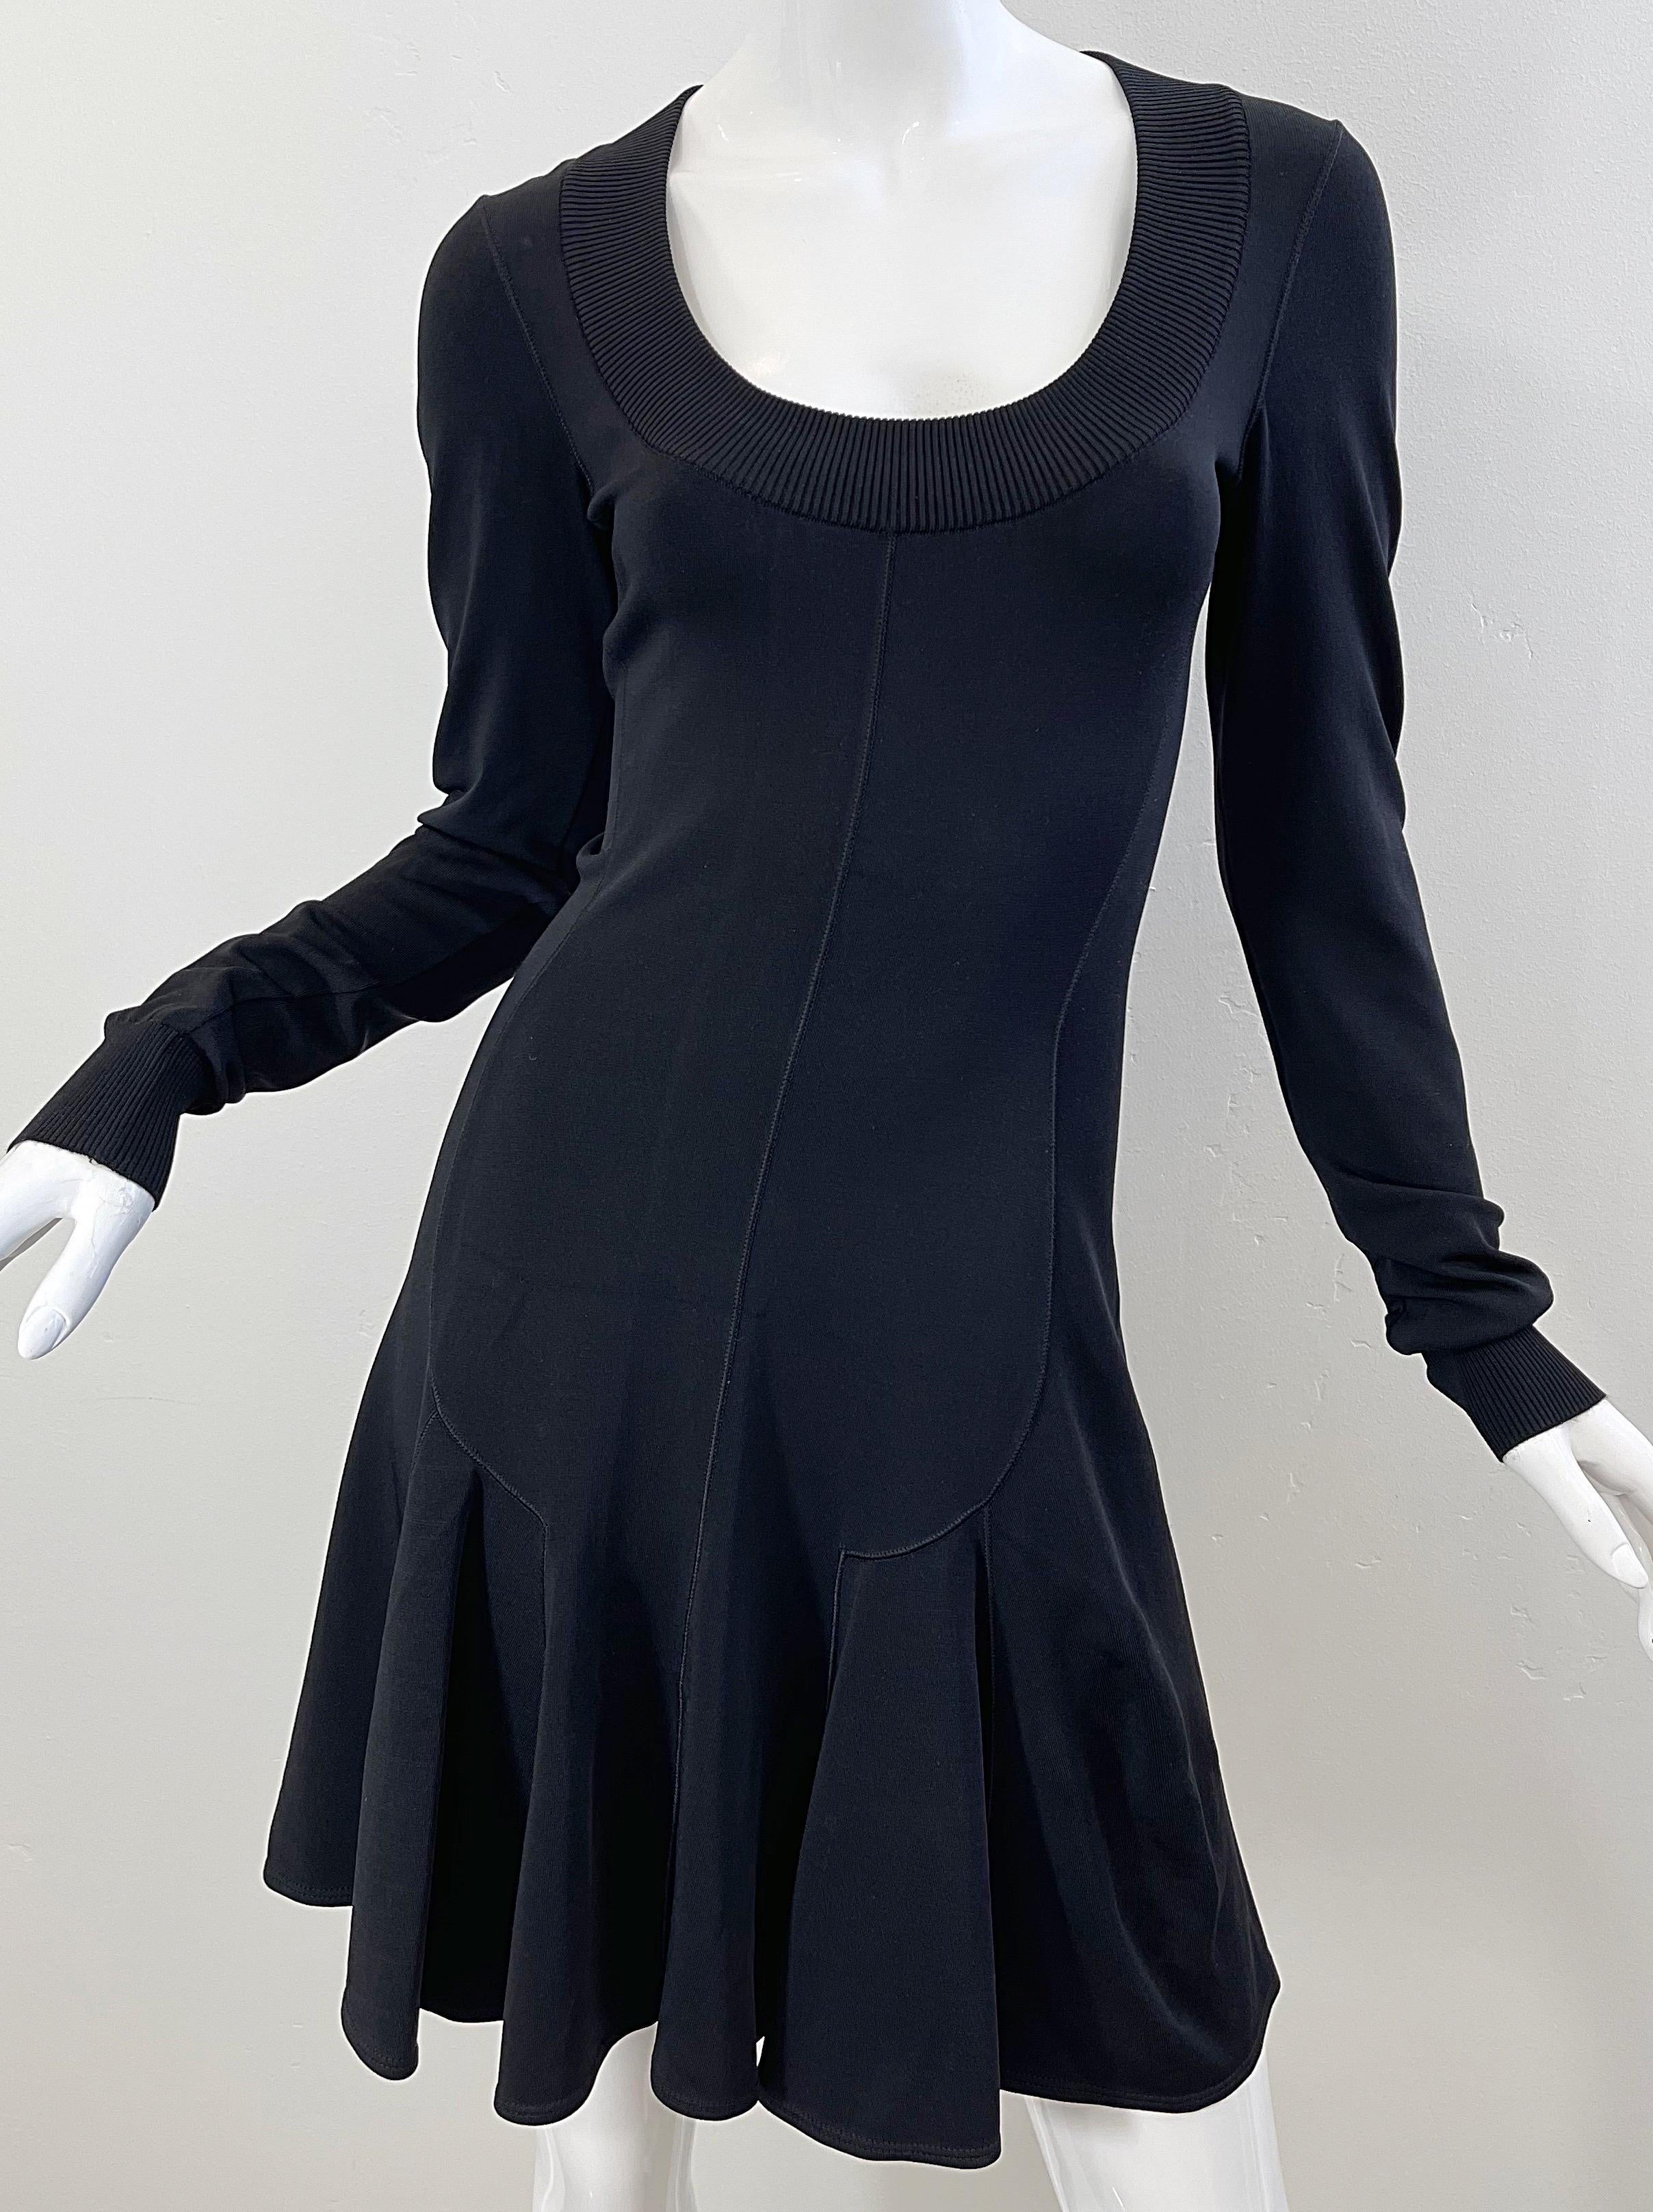 Azzedine Alaia 1990s Black Bodcon Long Sleeve Sz Medium Vintage 90s Skater Dress In Excellent Condition For Sale In San Diego, CA